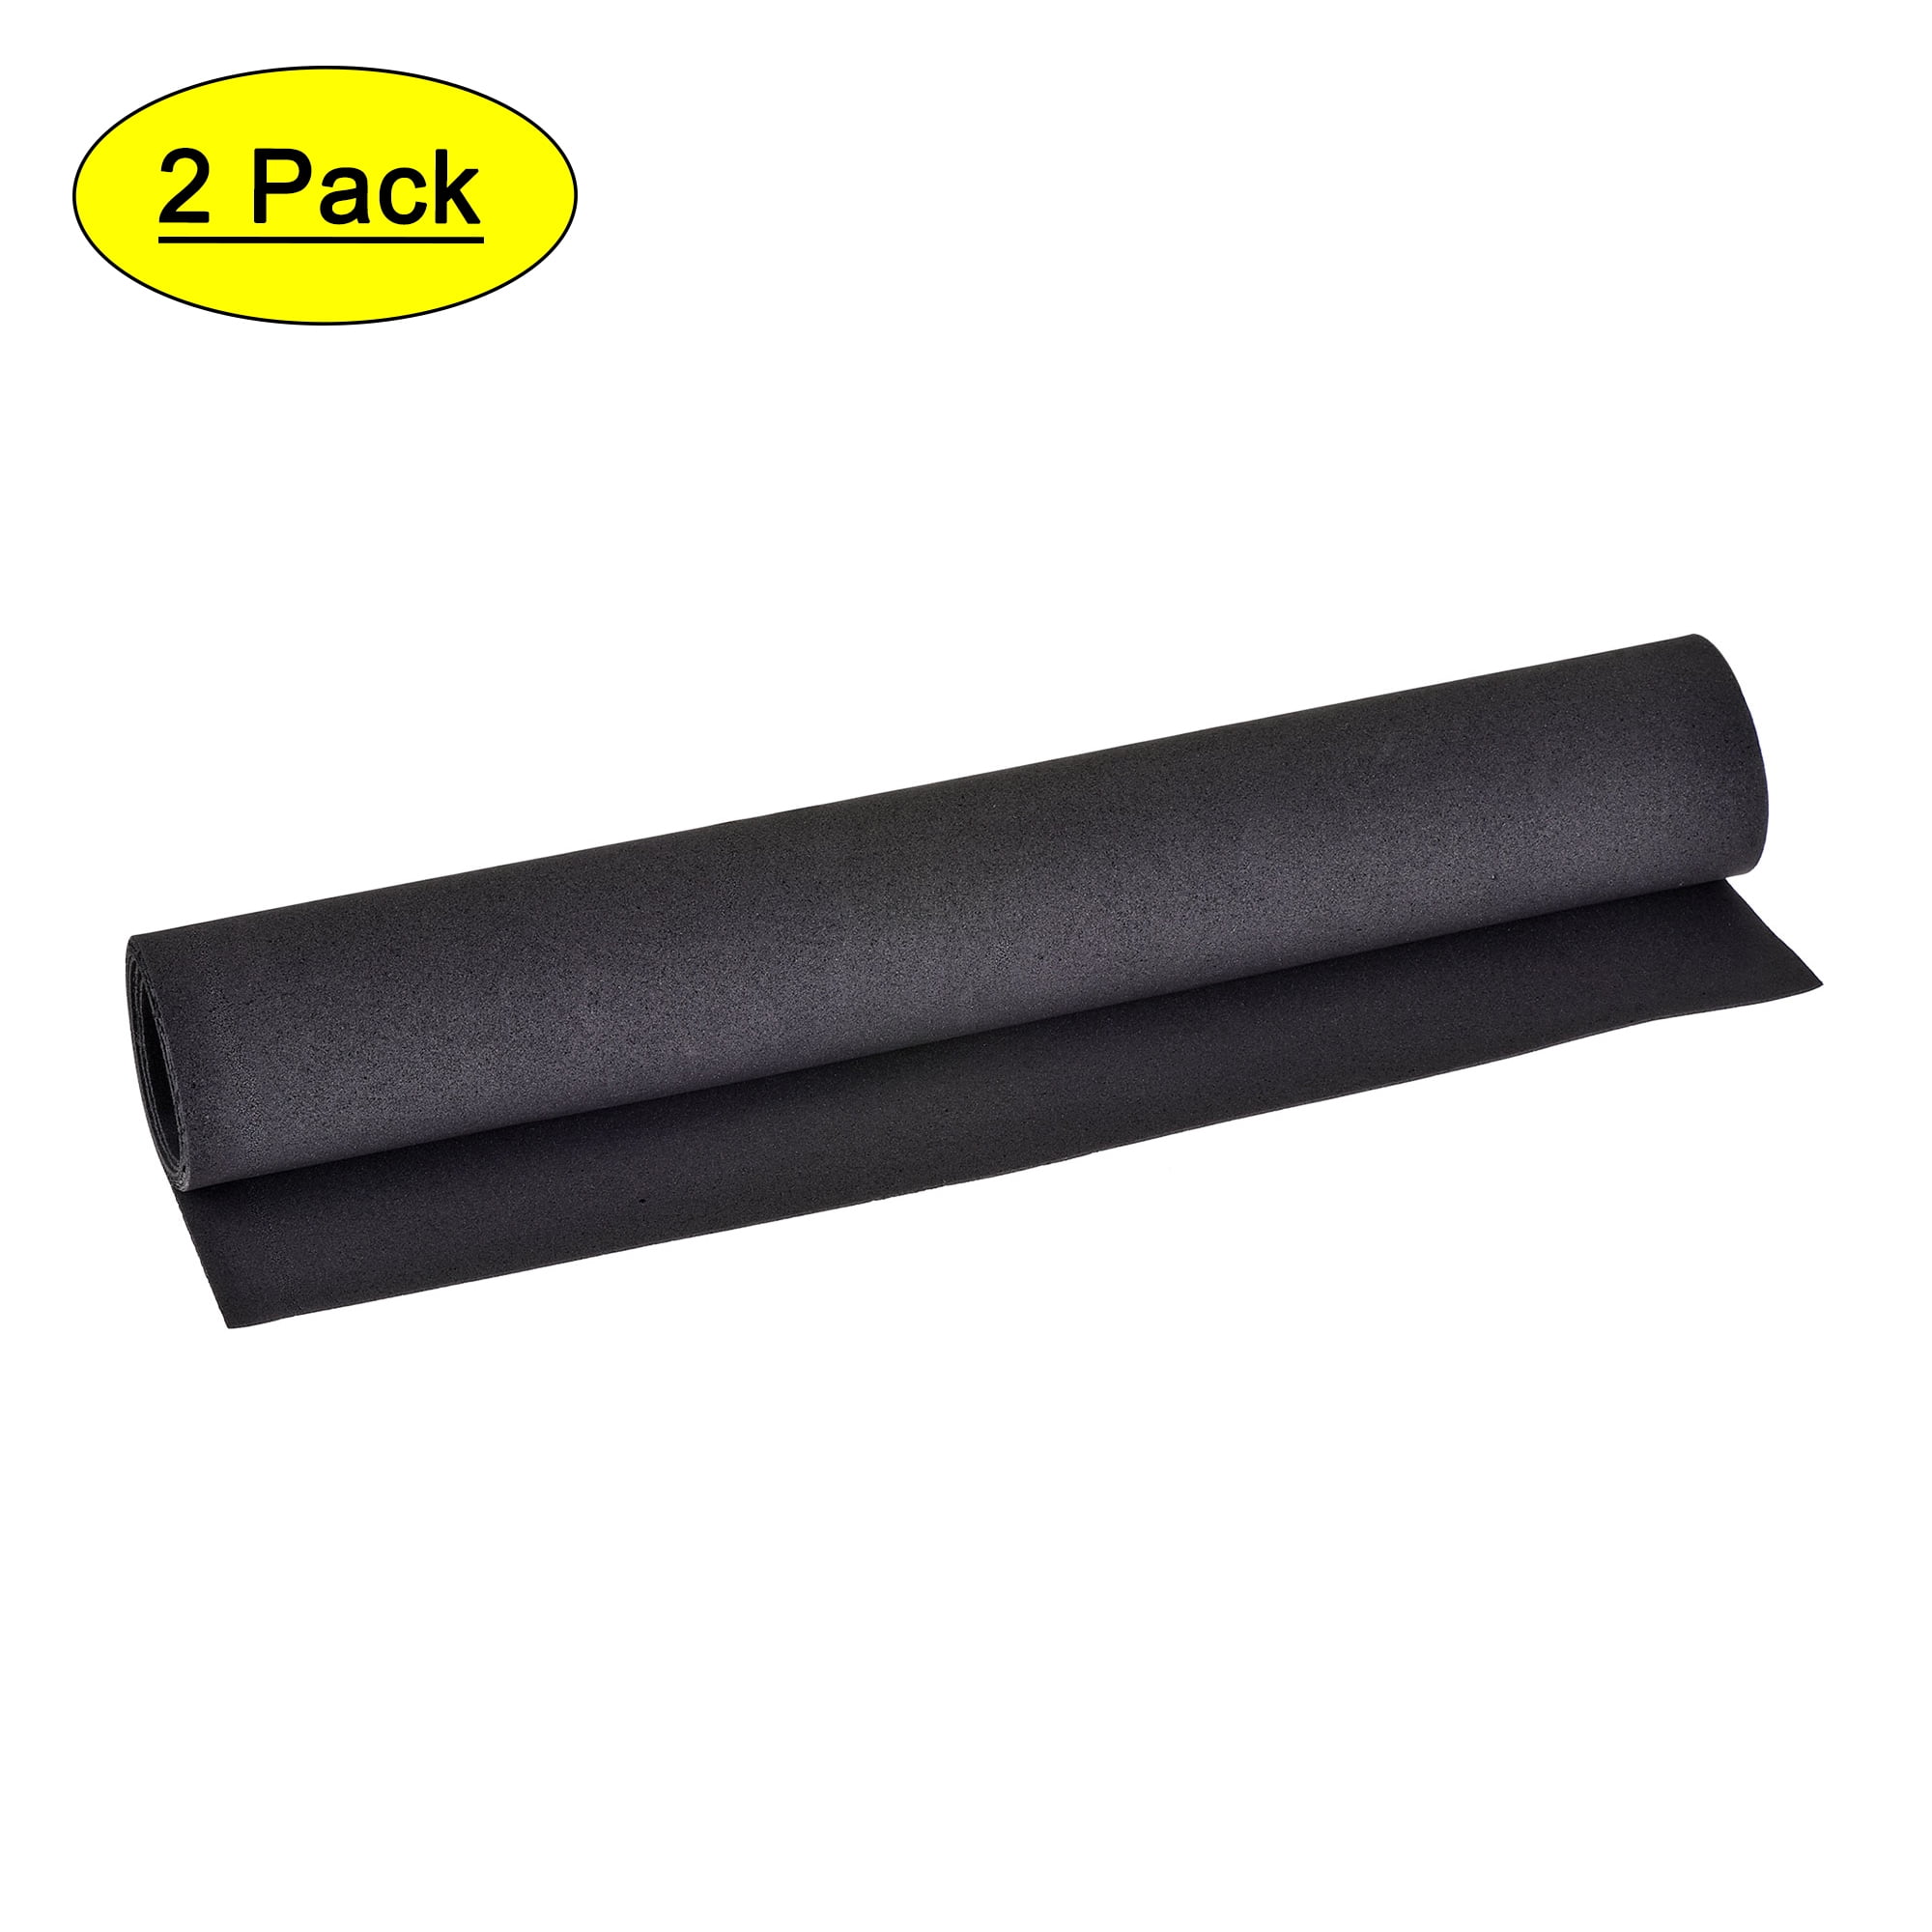 Uxcell Black EVA Foam Sheets Roll 13 x 19 Inch 2mm Thick for Crafts DIY  Projects 